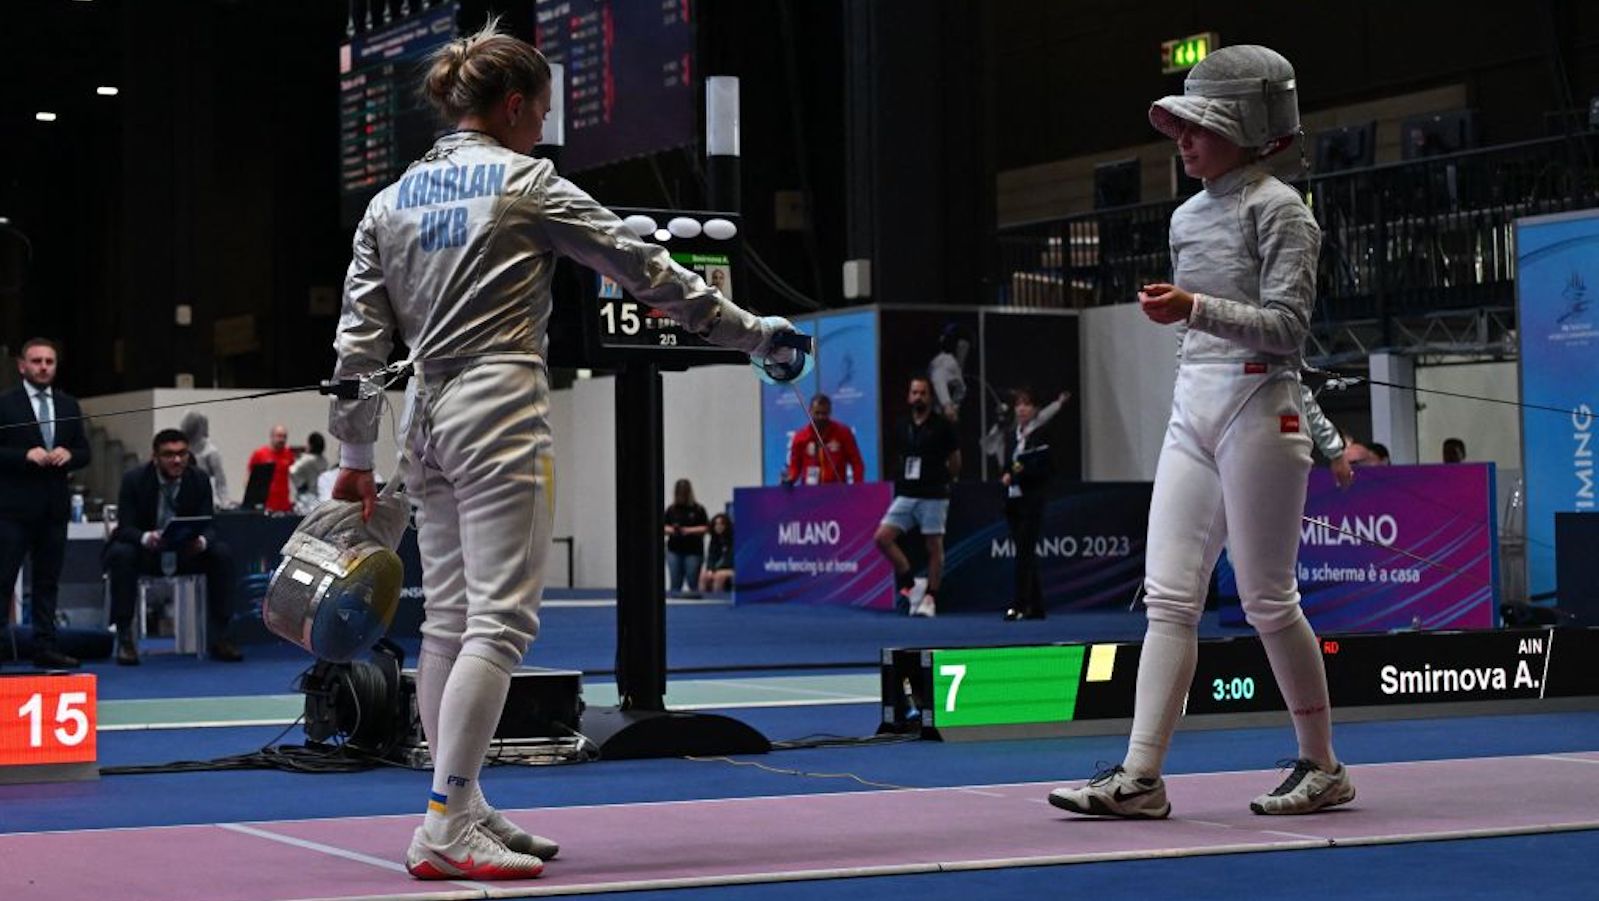 Ukraine's Olha Kharlan (L) refuses to shake hands with Russia's Anna Smirnova, registered as an Individual Neutral Athlete (AIN), after she defeated her during the Sabre Women's Senior Individual qualifiers, as part of the FIE Fencing World Championships at the Fair Allianz MI.CO (Milano Convegni) in Milan, on July 27, 2023.